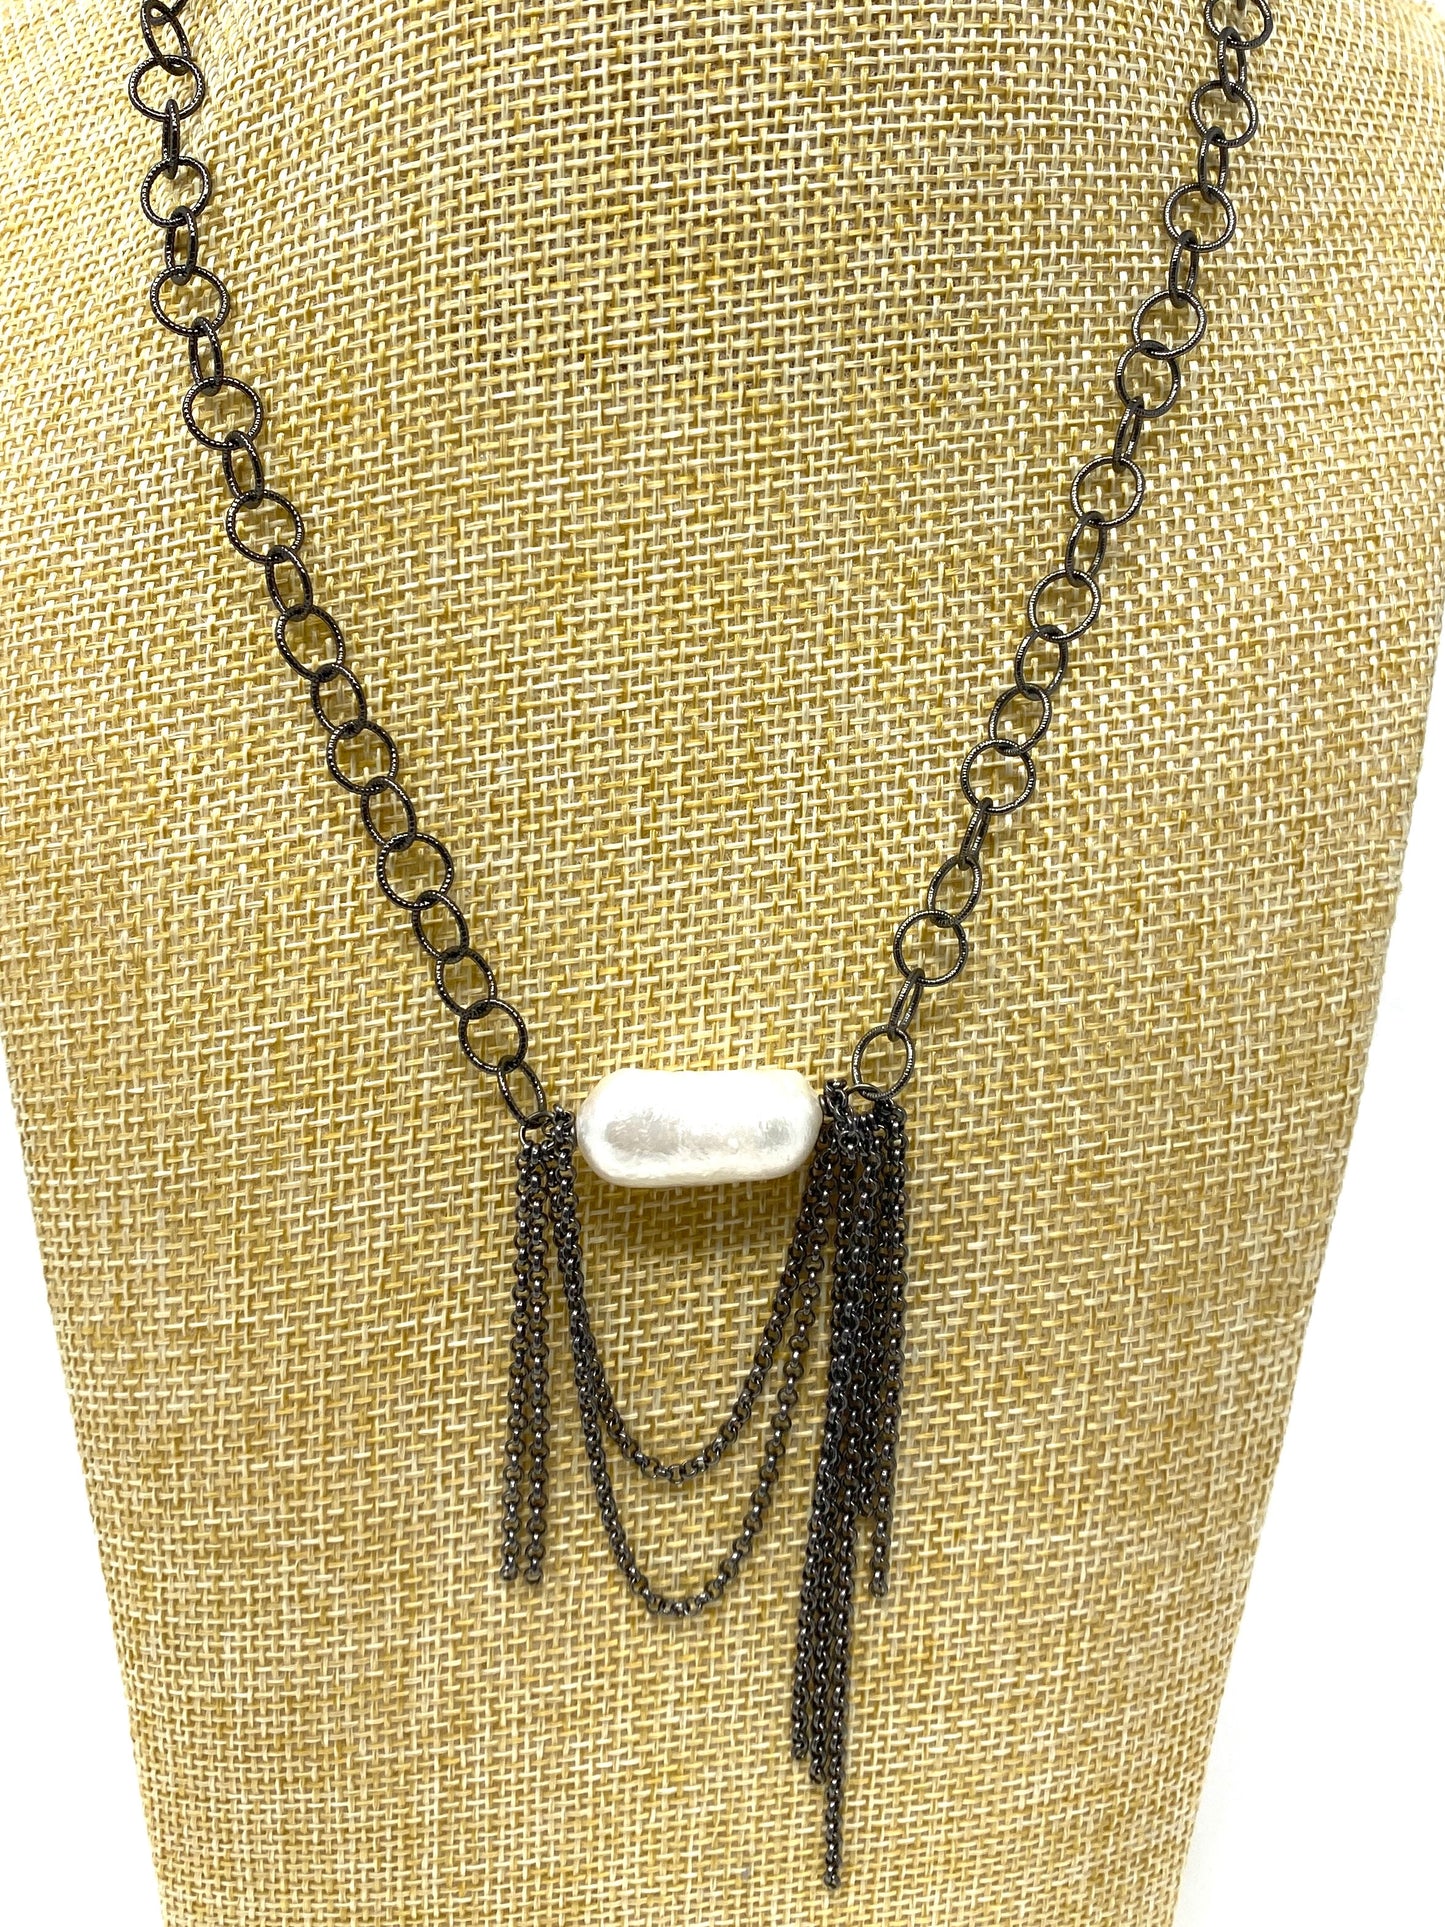 Oxidized Silver Chain Necklace With Freshwater Pearl and Chain Accent